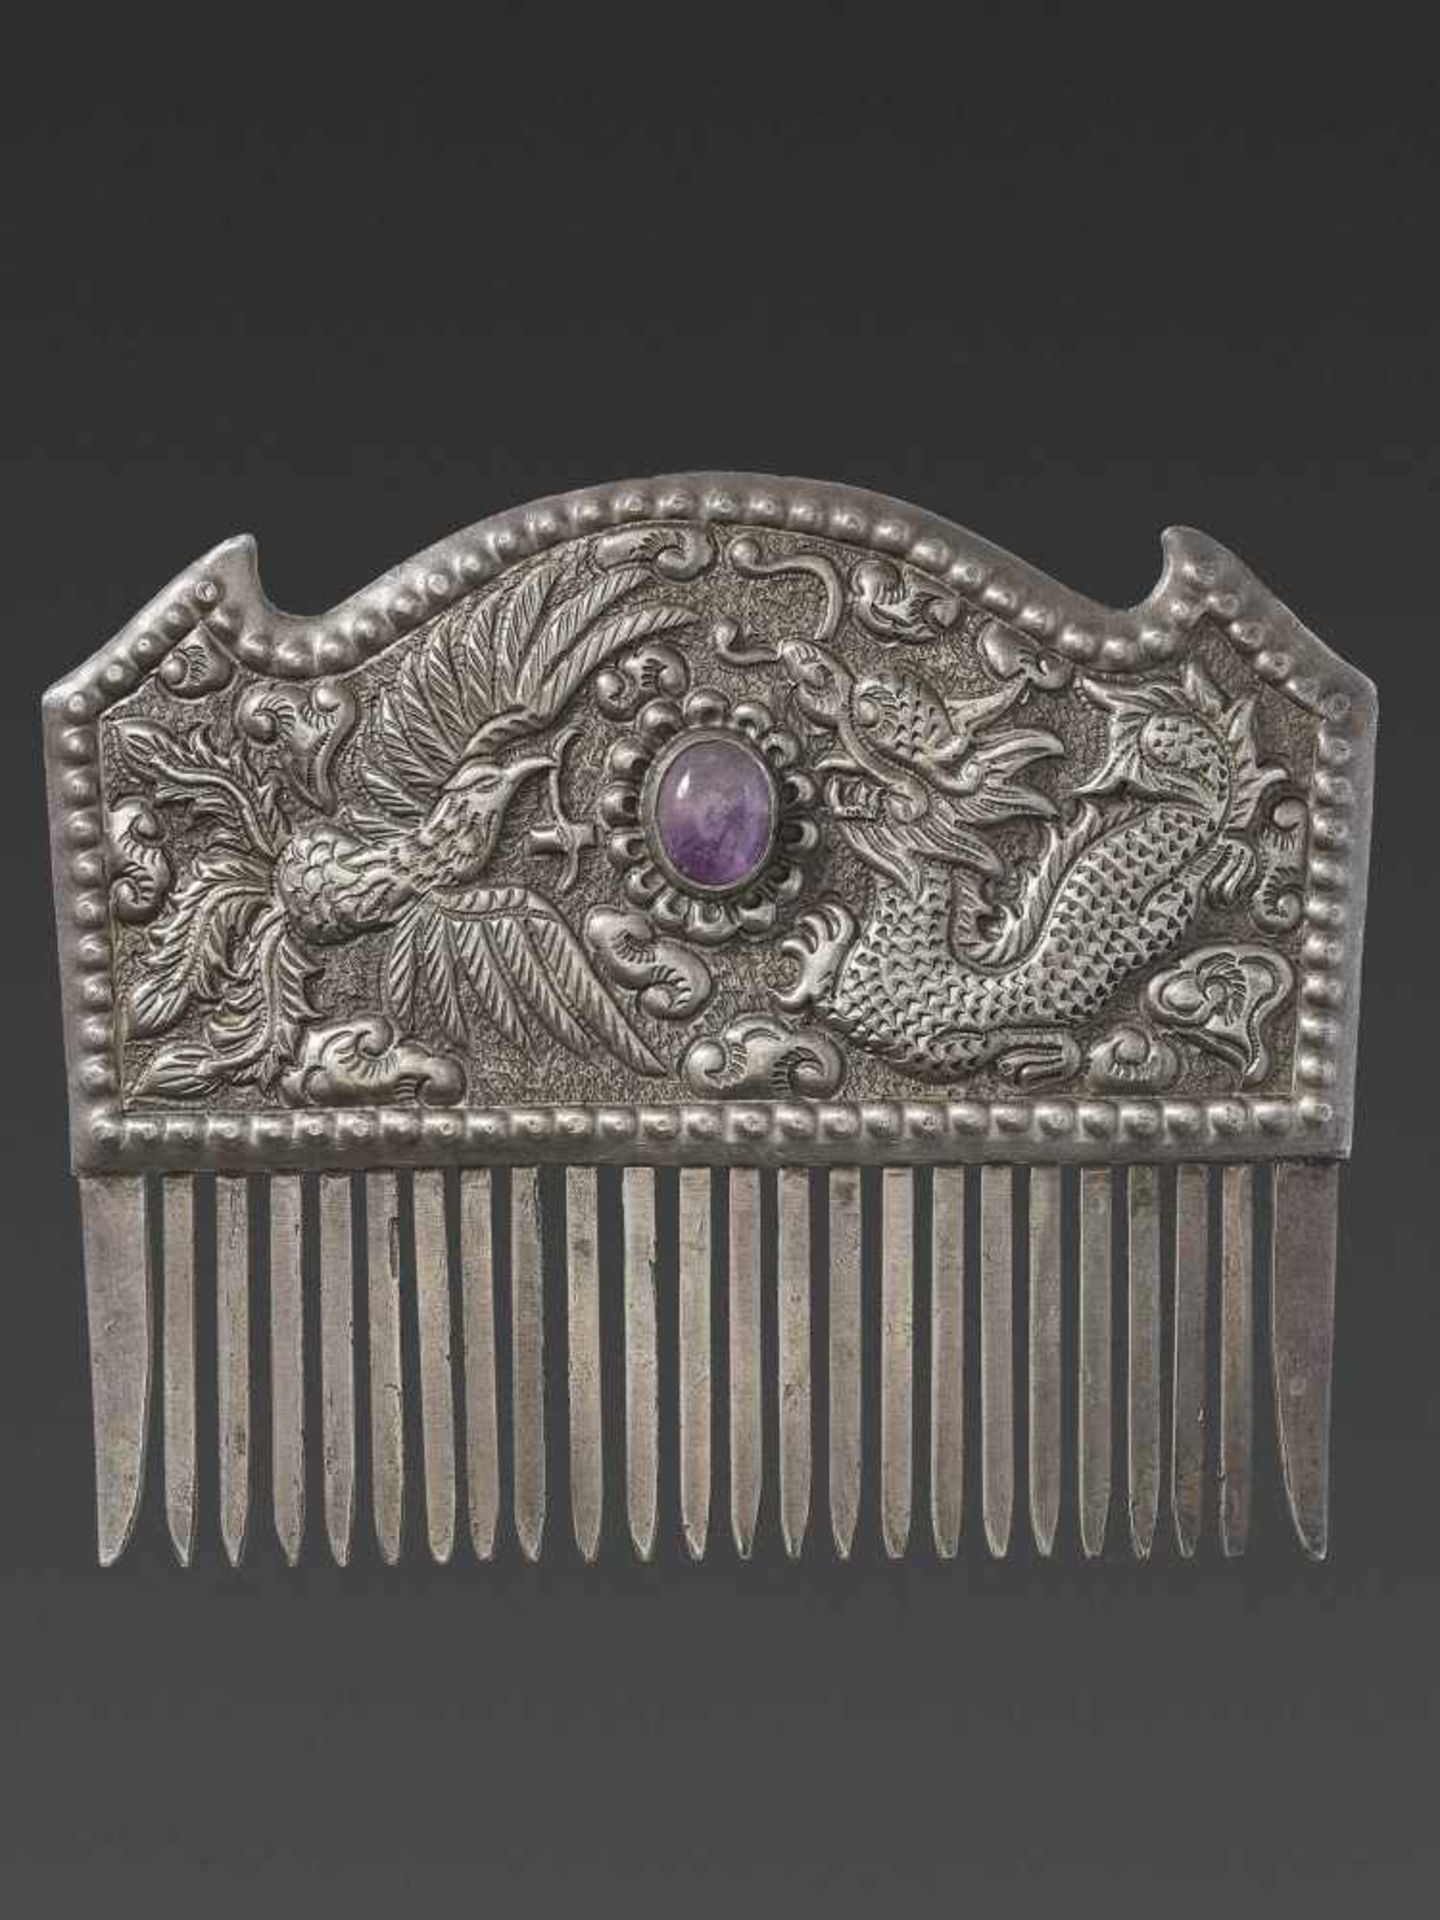 A VIETNAMESE AMETHYST-SET SILVER REPOUSSÉ COMB WITH PHOENIX AND DRAGON - Image 6 of 6